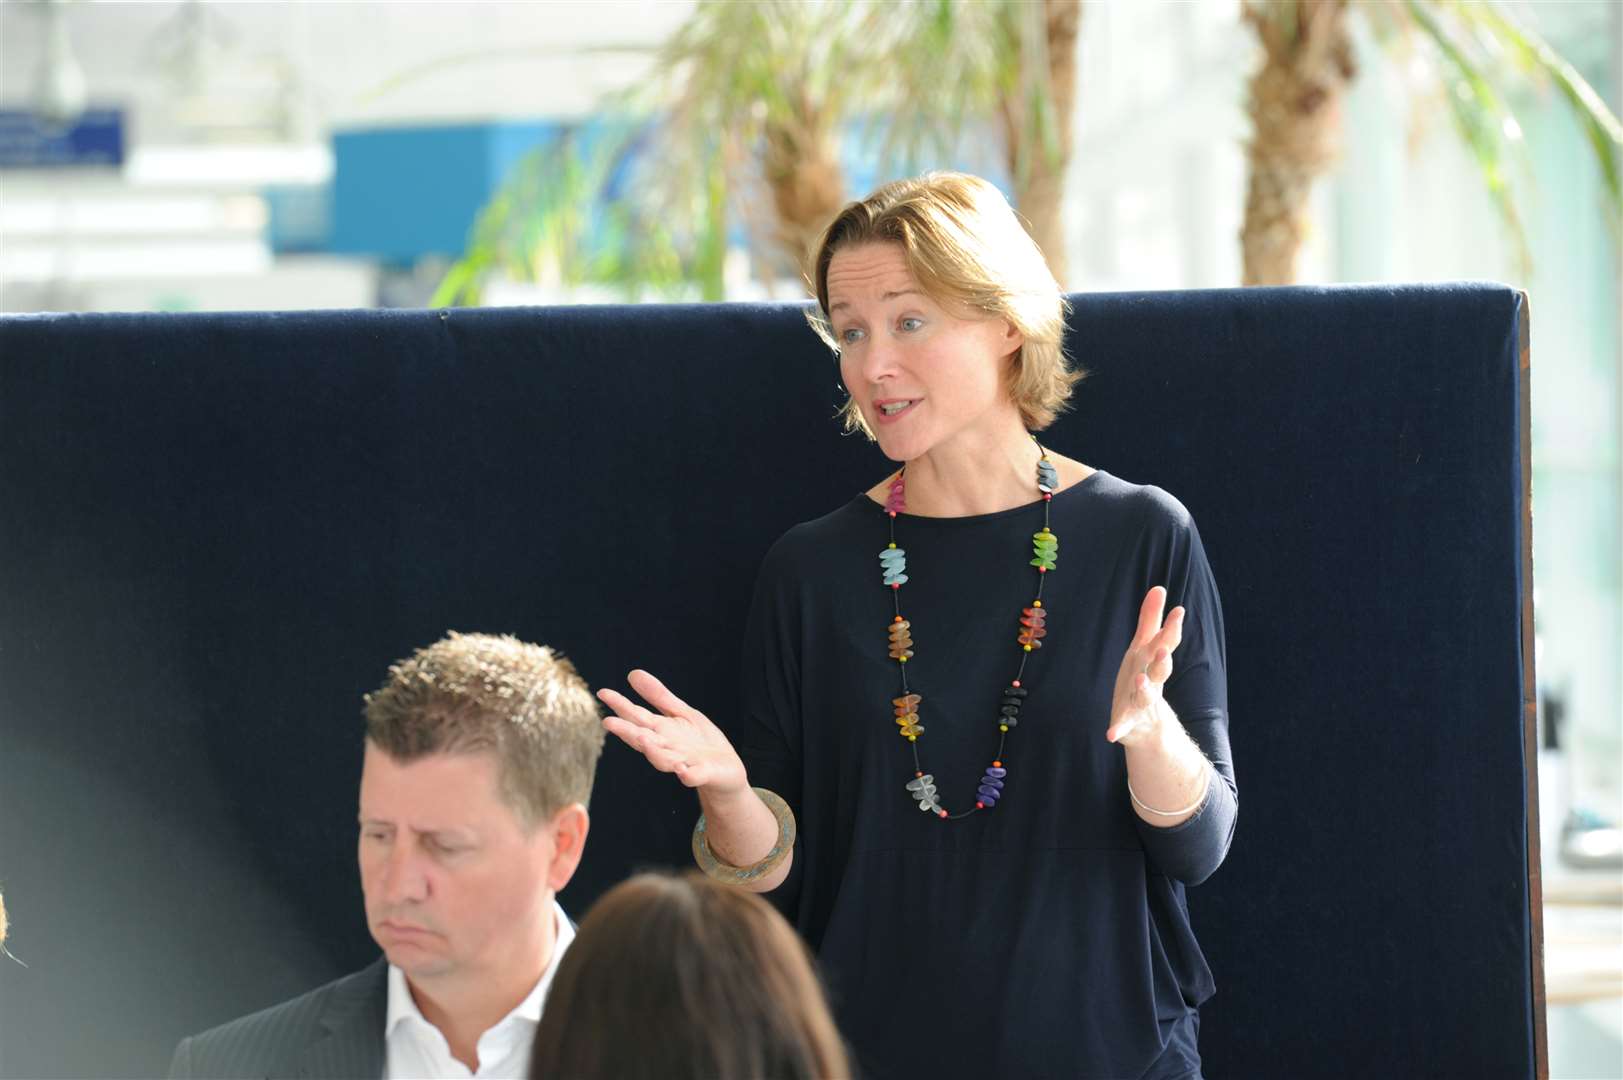 Director of strategy Louise Wyman speaking at the North Kent Expo earlier this year.